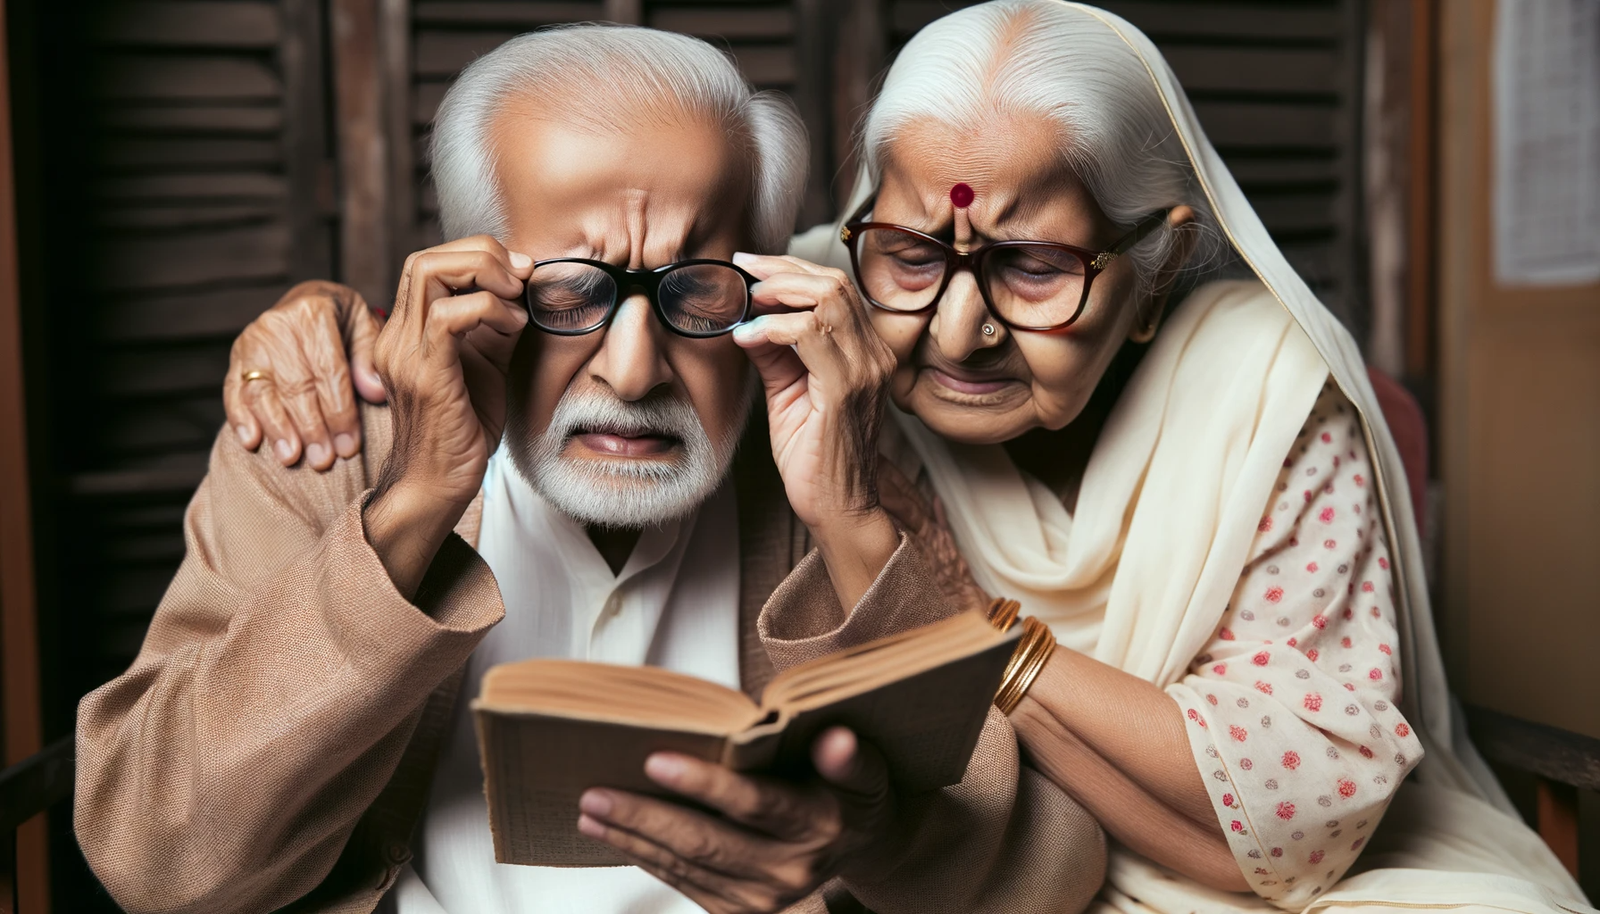 lderly-Indian-man-and-woman-sitting-together-with-the-man-trying-to-read-a-book-but-struggling-due-to-cataracts